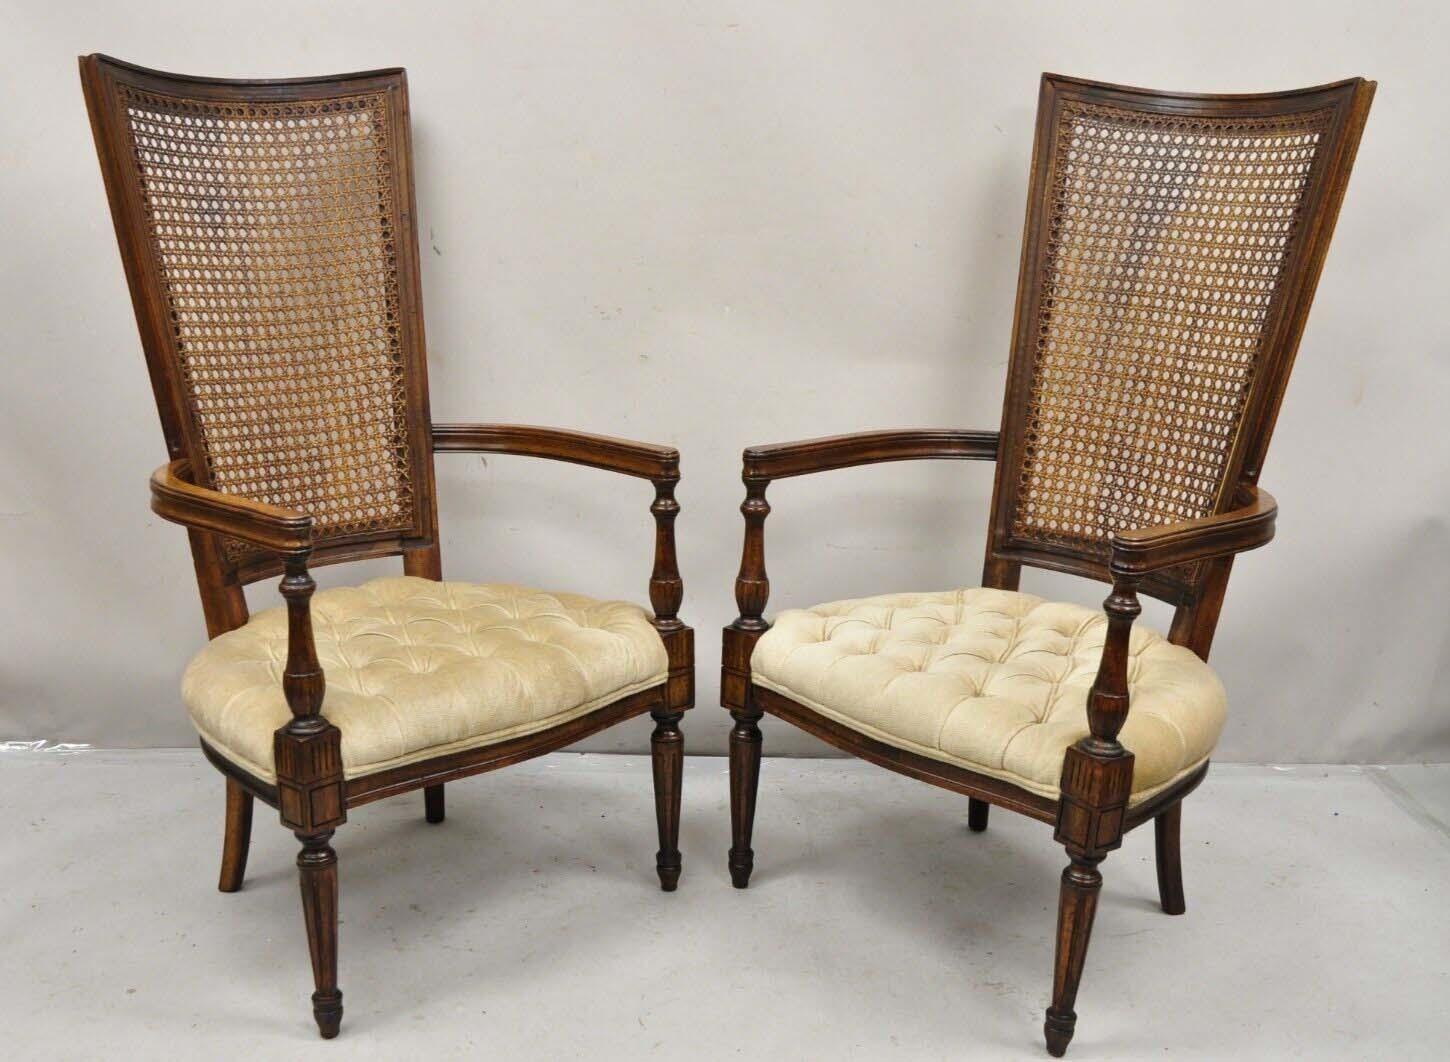 Vintage Hollywood Regency Tall Cane Back Fireside Lounge Armchairs - a Pair. Circa Mid 20th Century. Measurements: 47